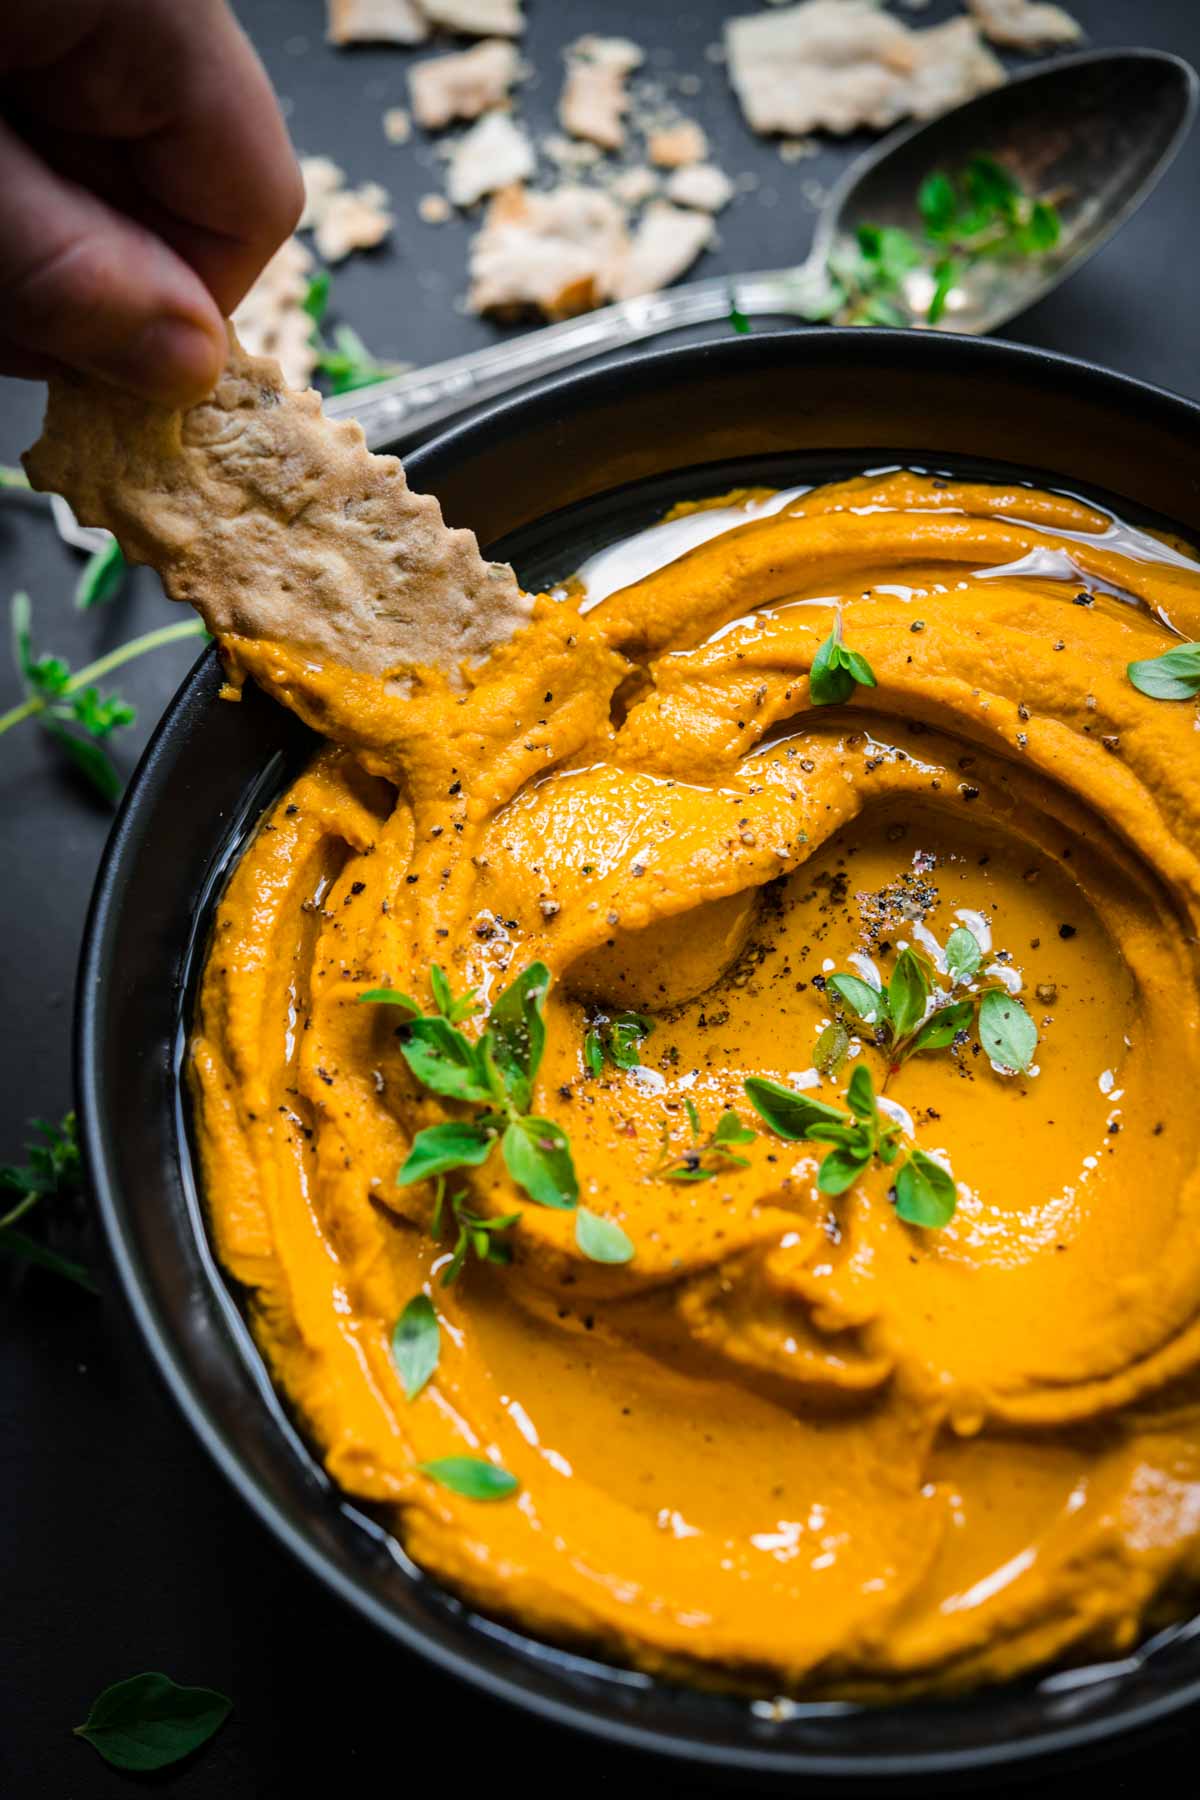 Roasted carrot dip in a bowl being scooped with a cracker.